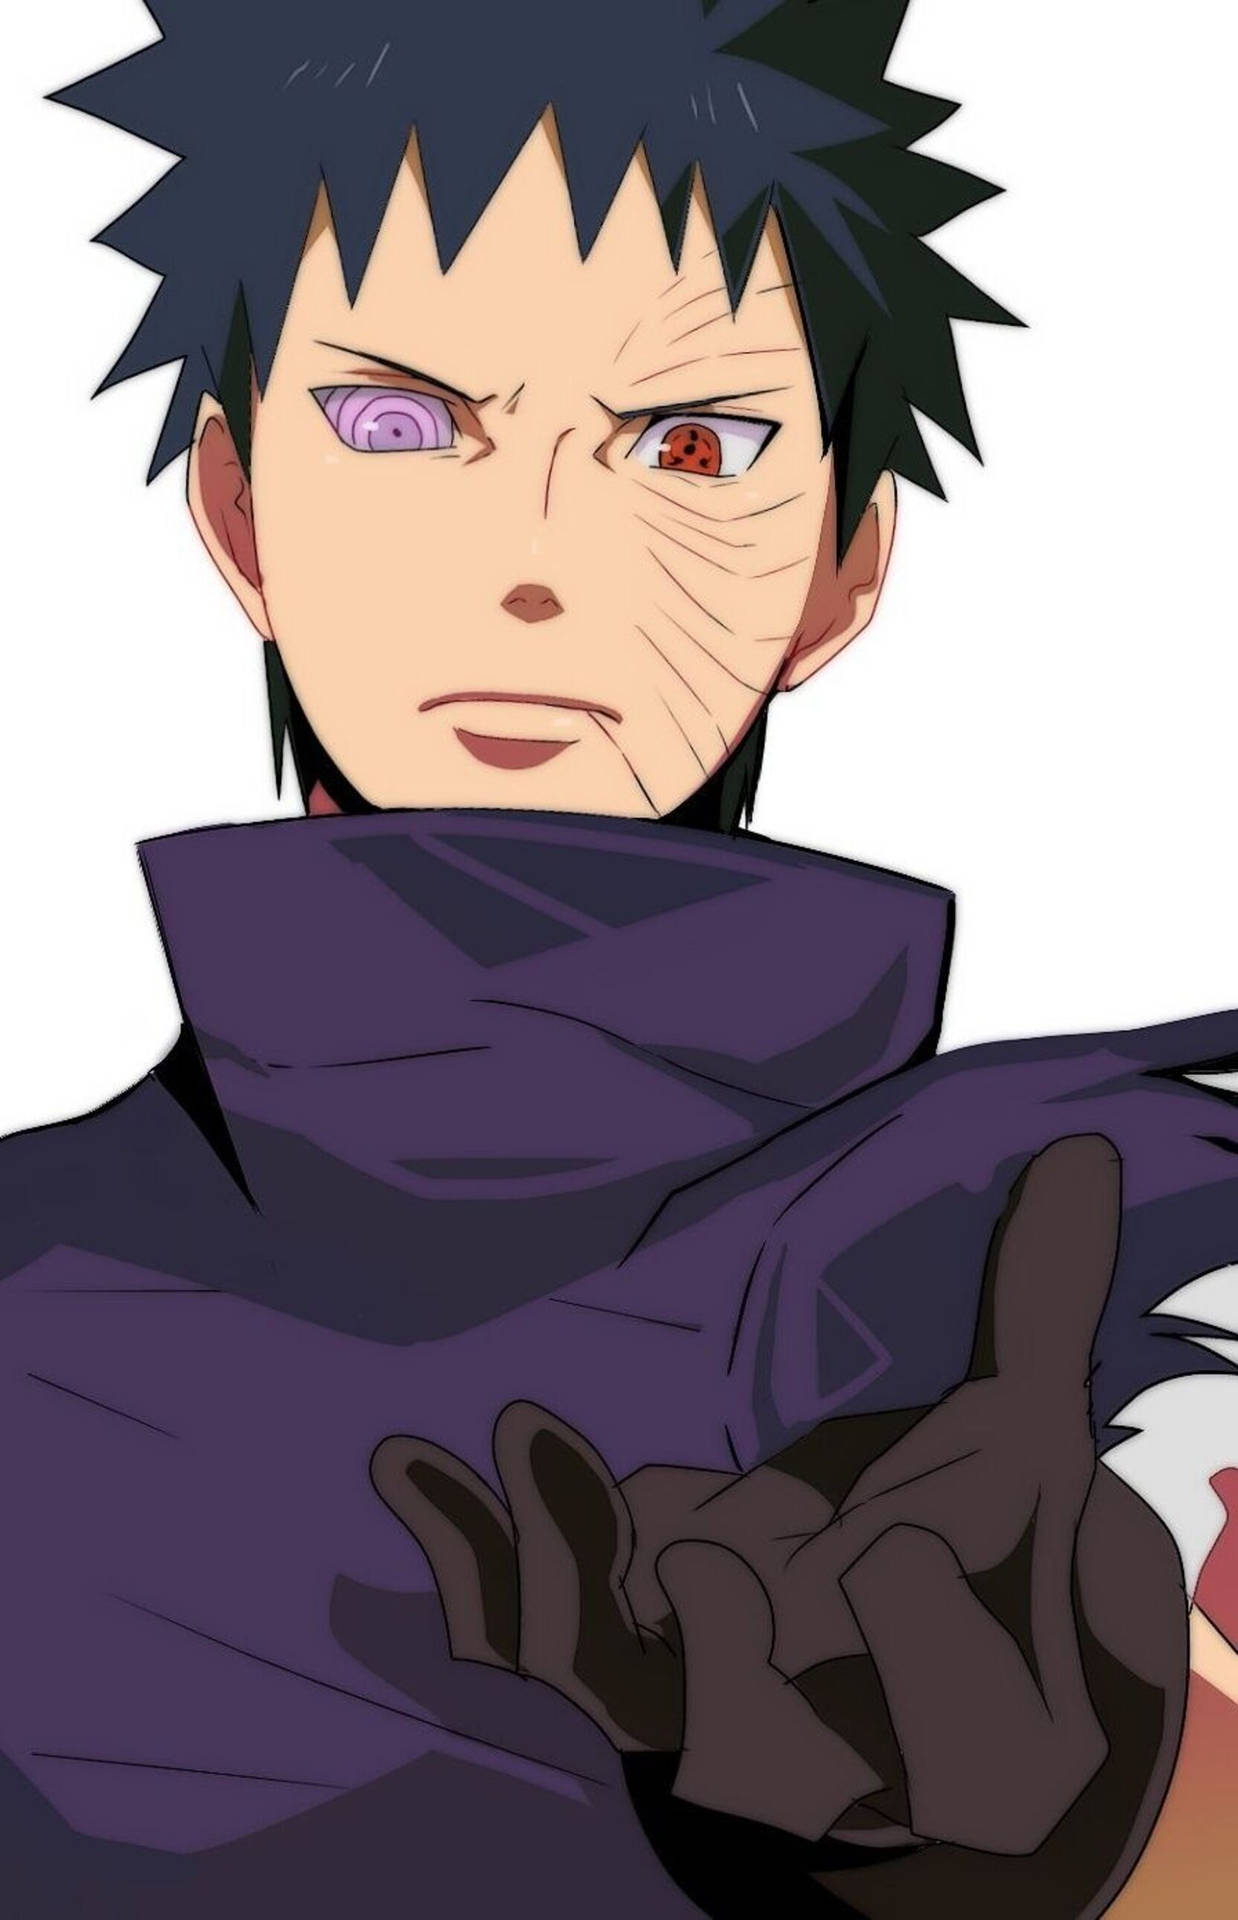 Show Your Anime Love With Obito Uchiha!